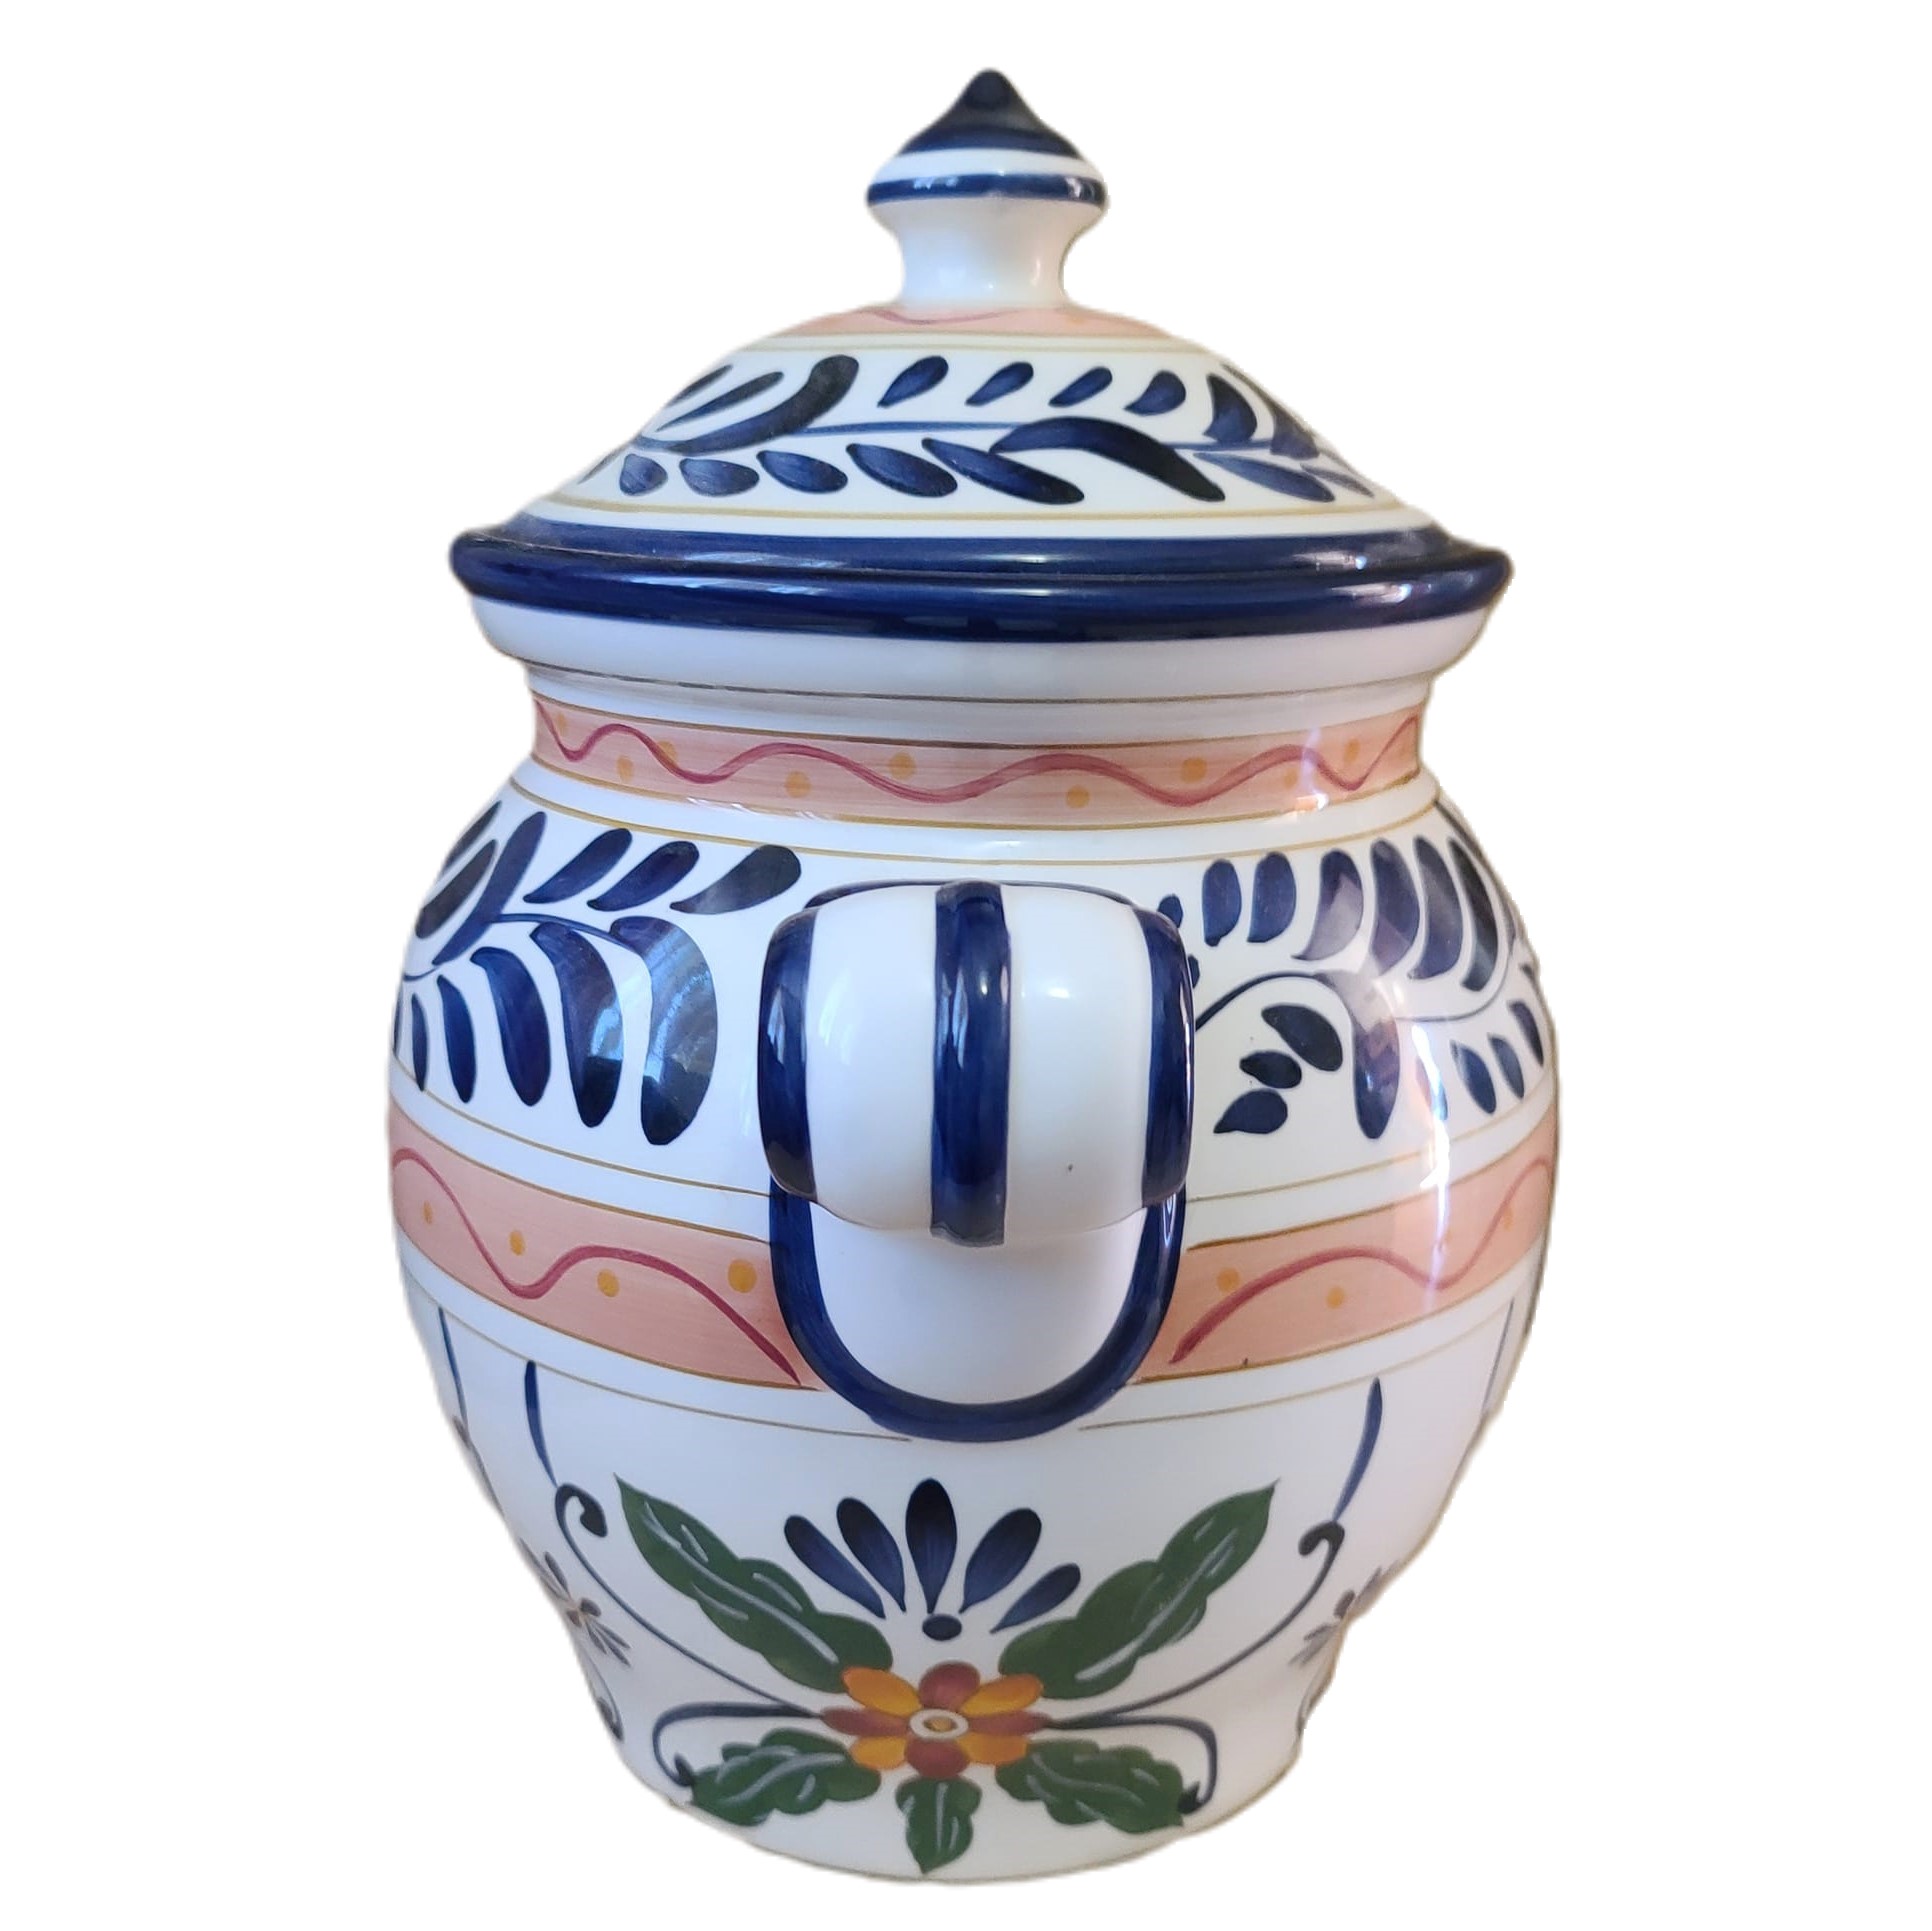 Talavera XL Cookie Jar, Cookie Canister, by Tabletops Unlimited